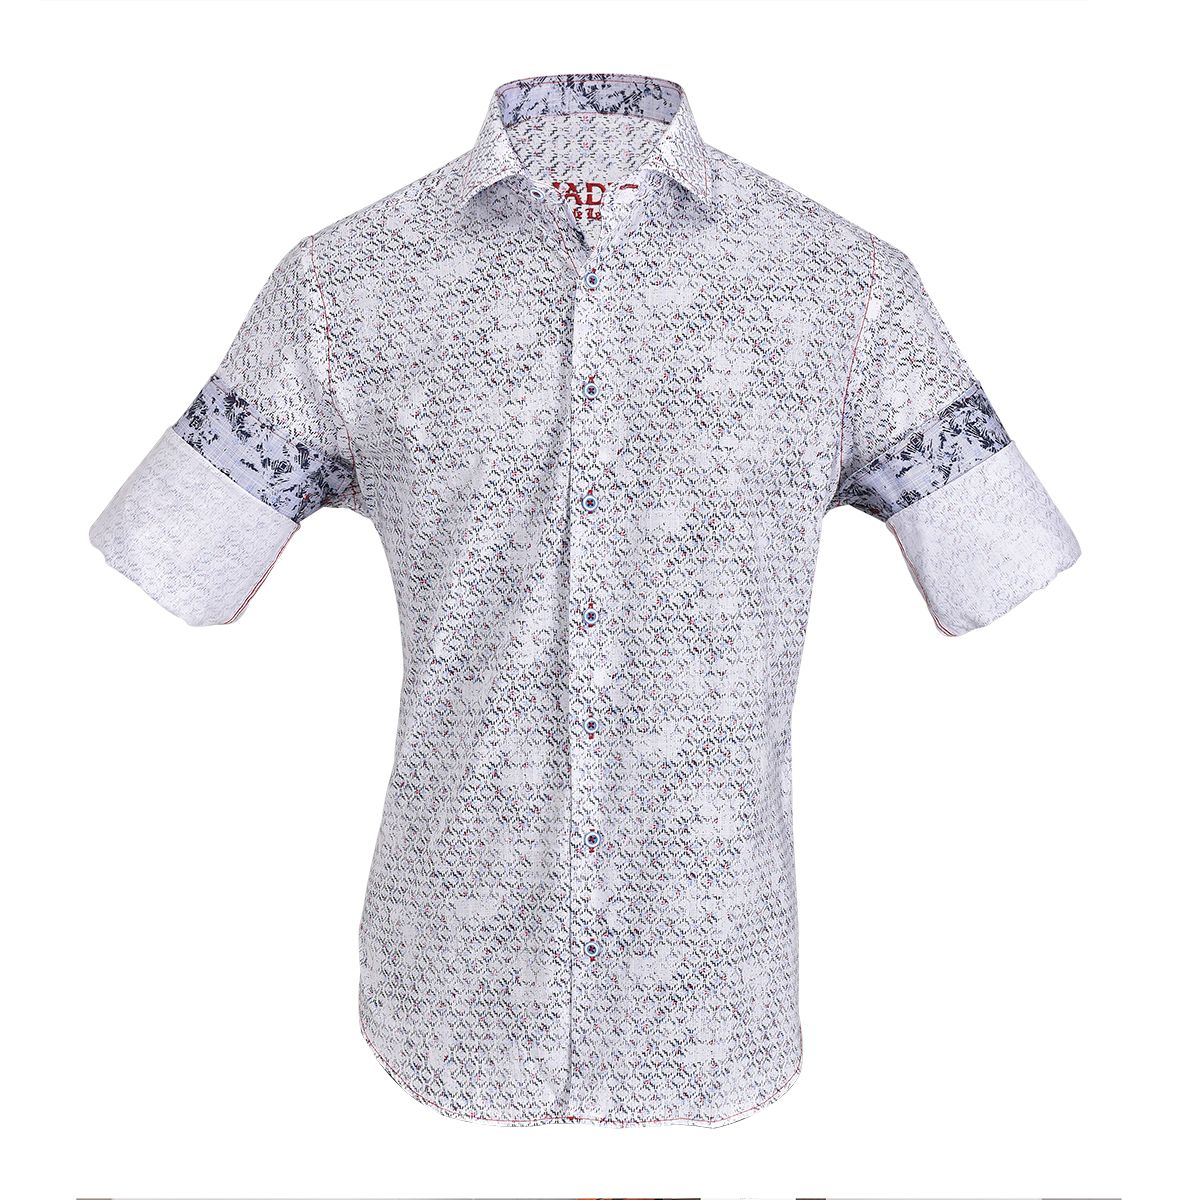 CM0W476 - Cuadra white fashion casual fractured abstract shirt for men-Kuet.us